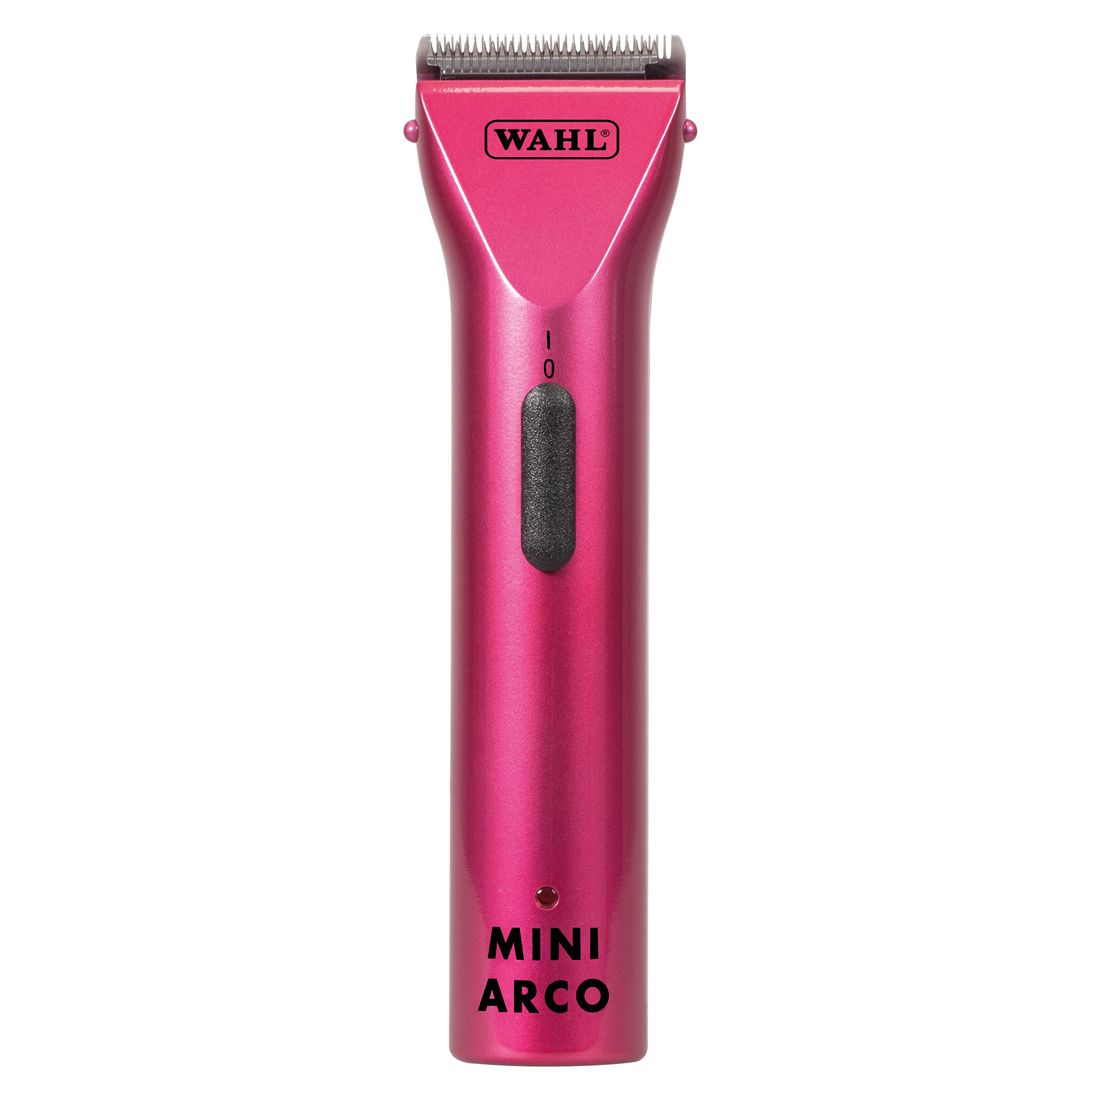 mini trimmer wahl